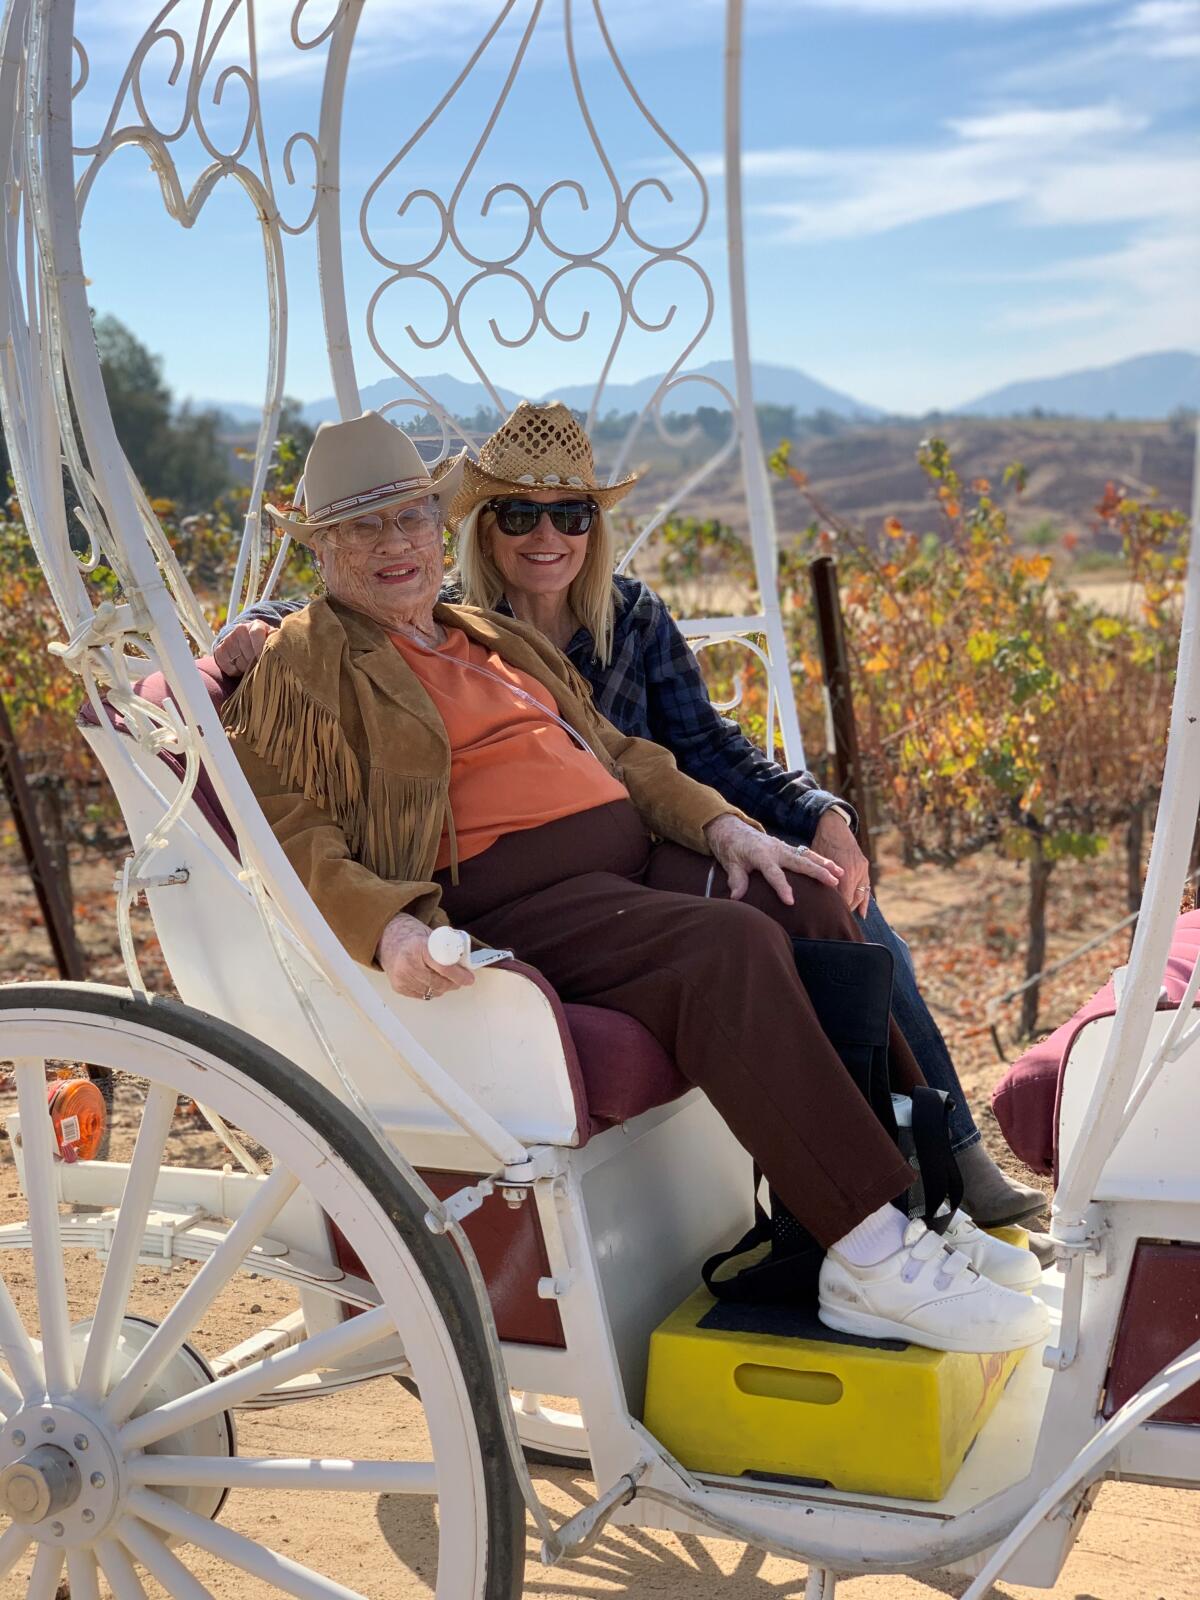 Opal Hagerty, left, rides in the carriage with Judy Lucous, wellness director at Cypress Court retirement community in Escondido. Through the community's Dreams Do Come True program, Lucous grants bucket-list wishes for the center elderly residents.